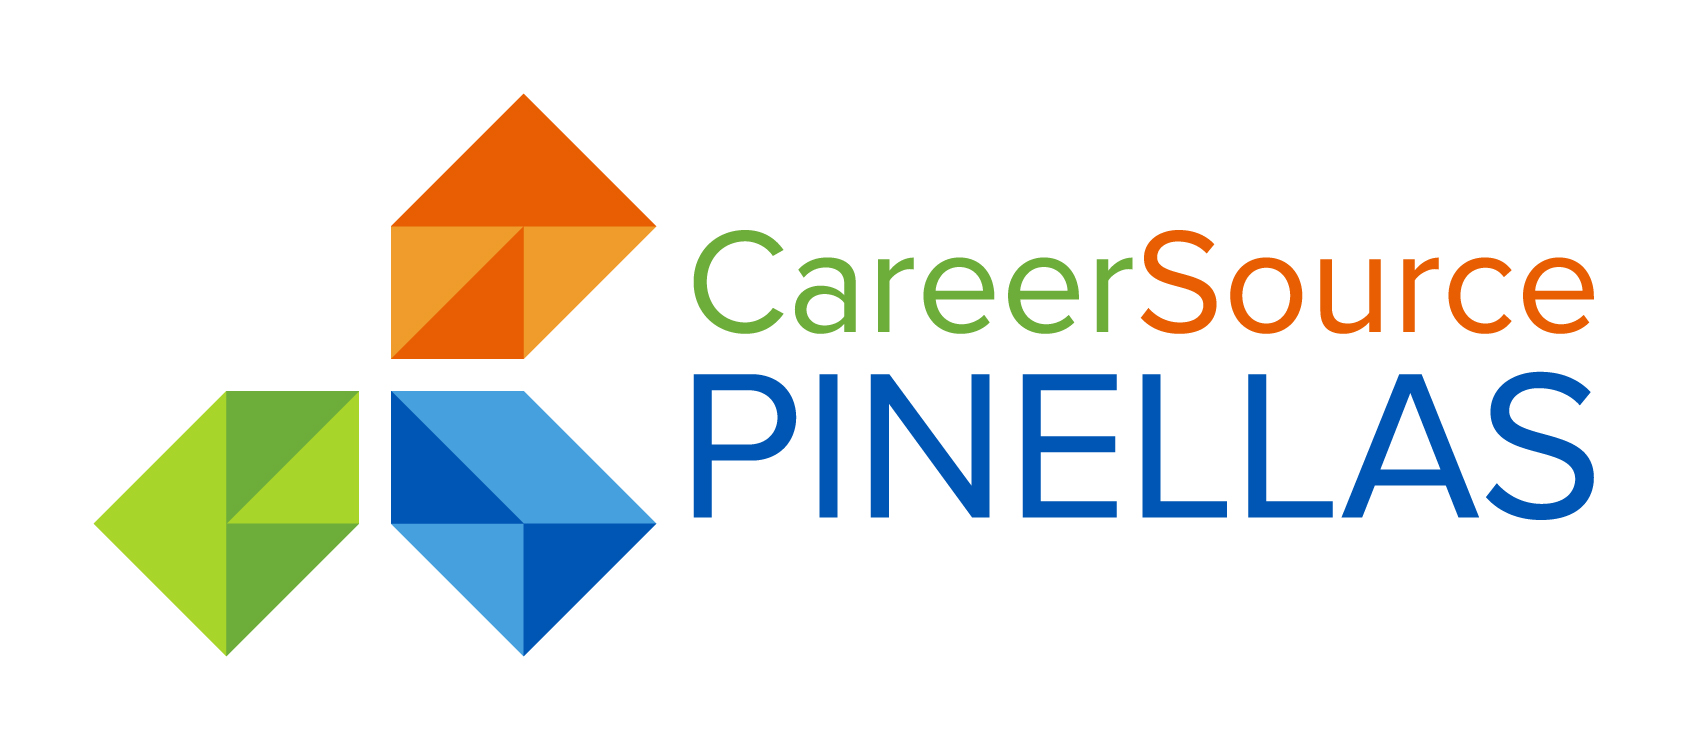 CareerSource Pinellas